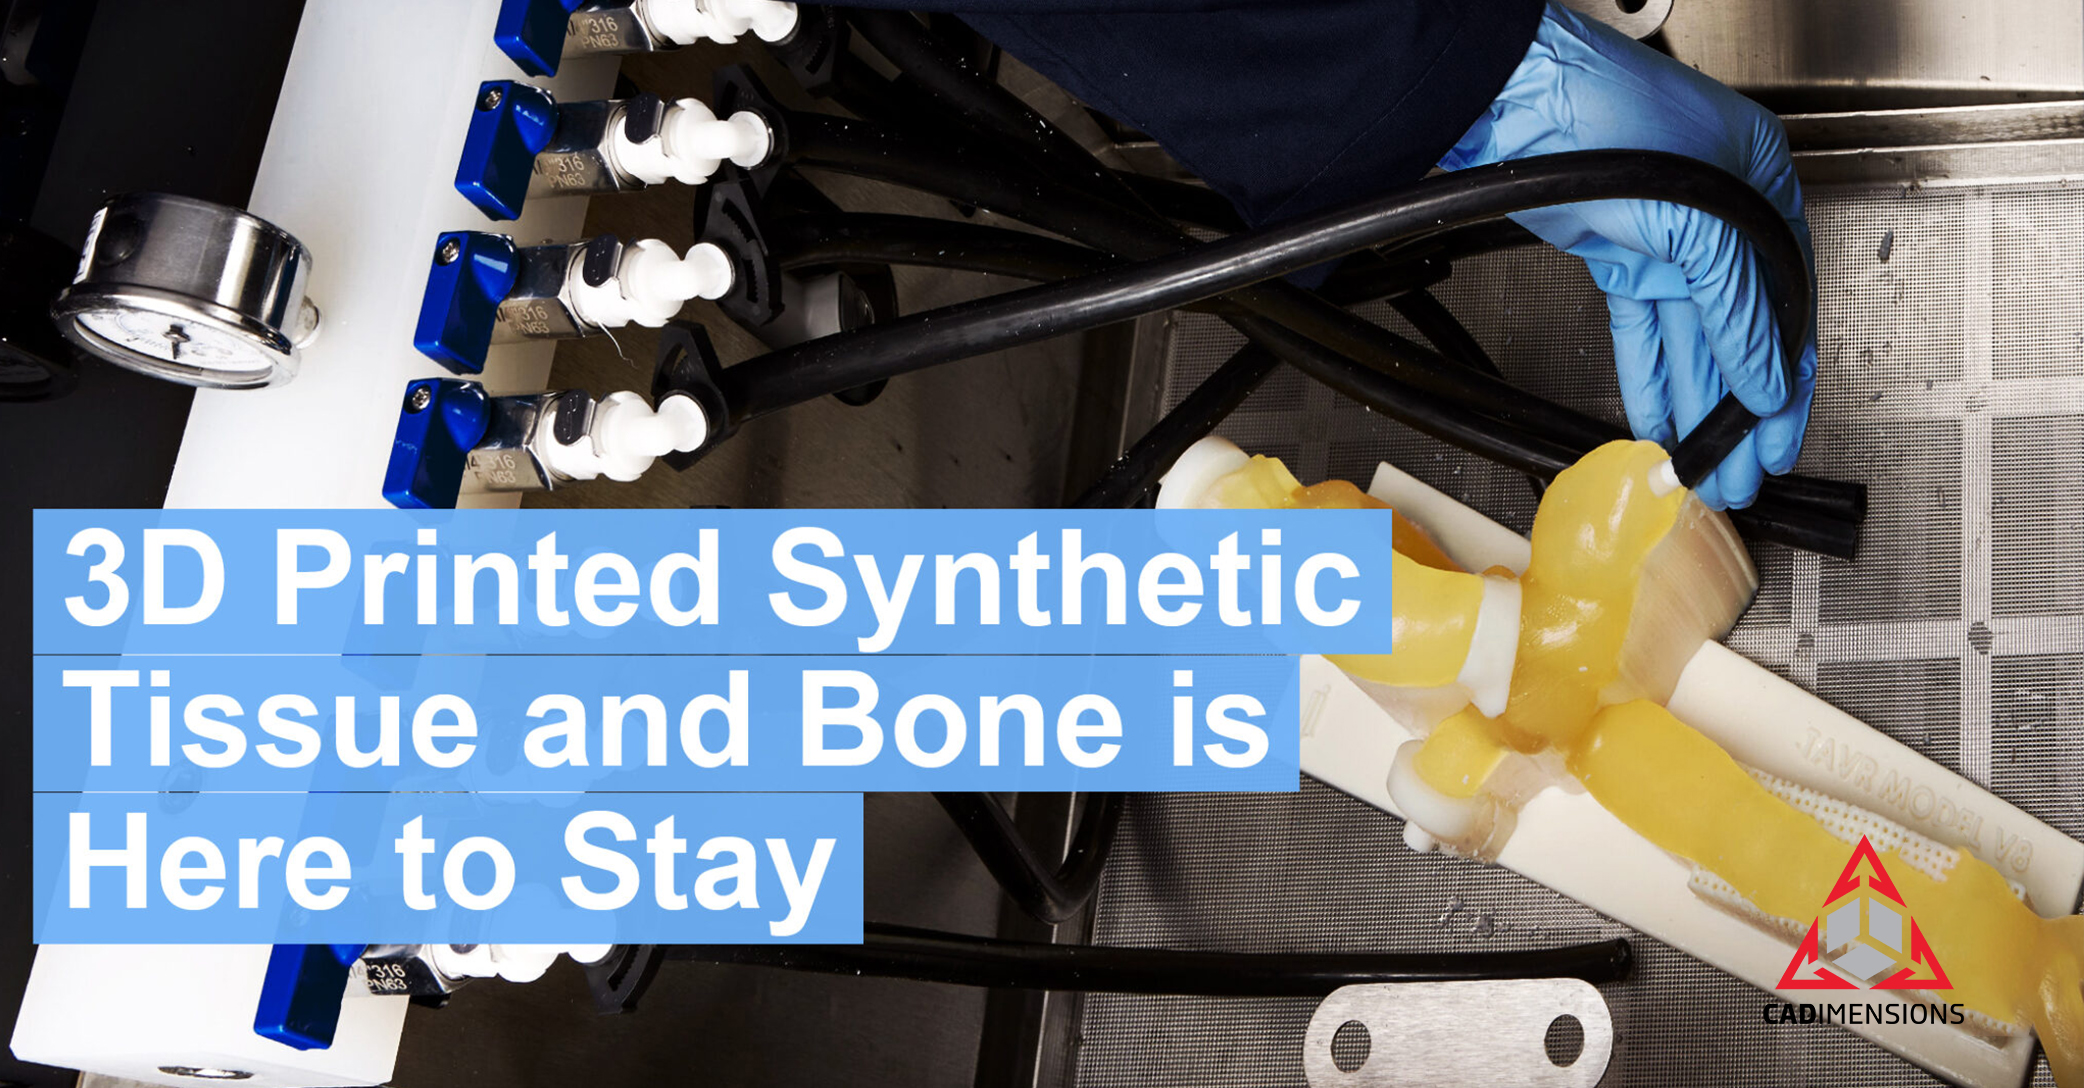 Why 3D Printed Synthetic Bodies Parts Are Amazing